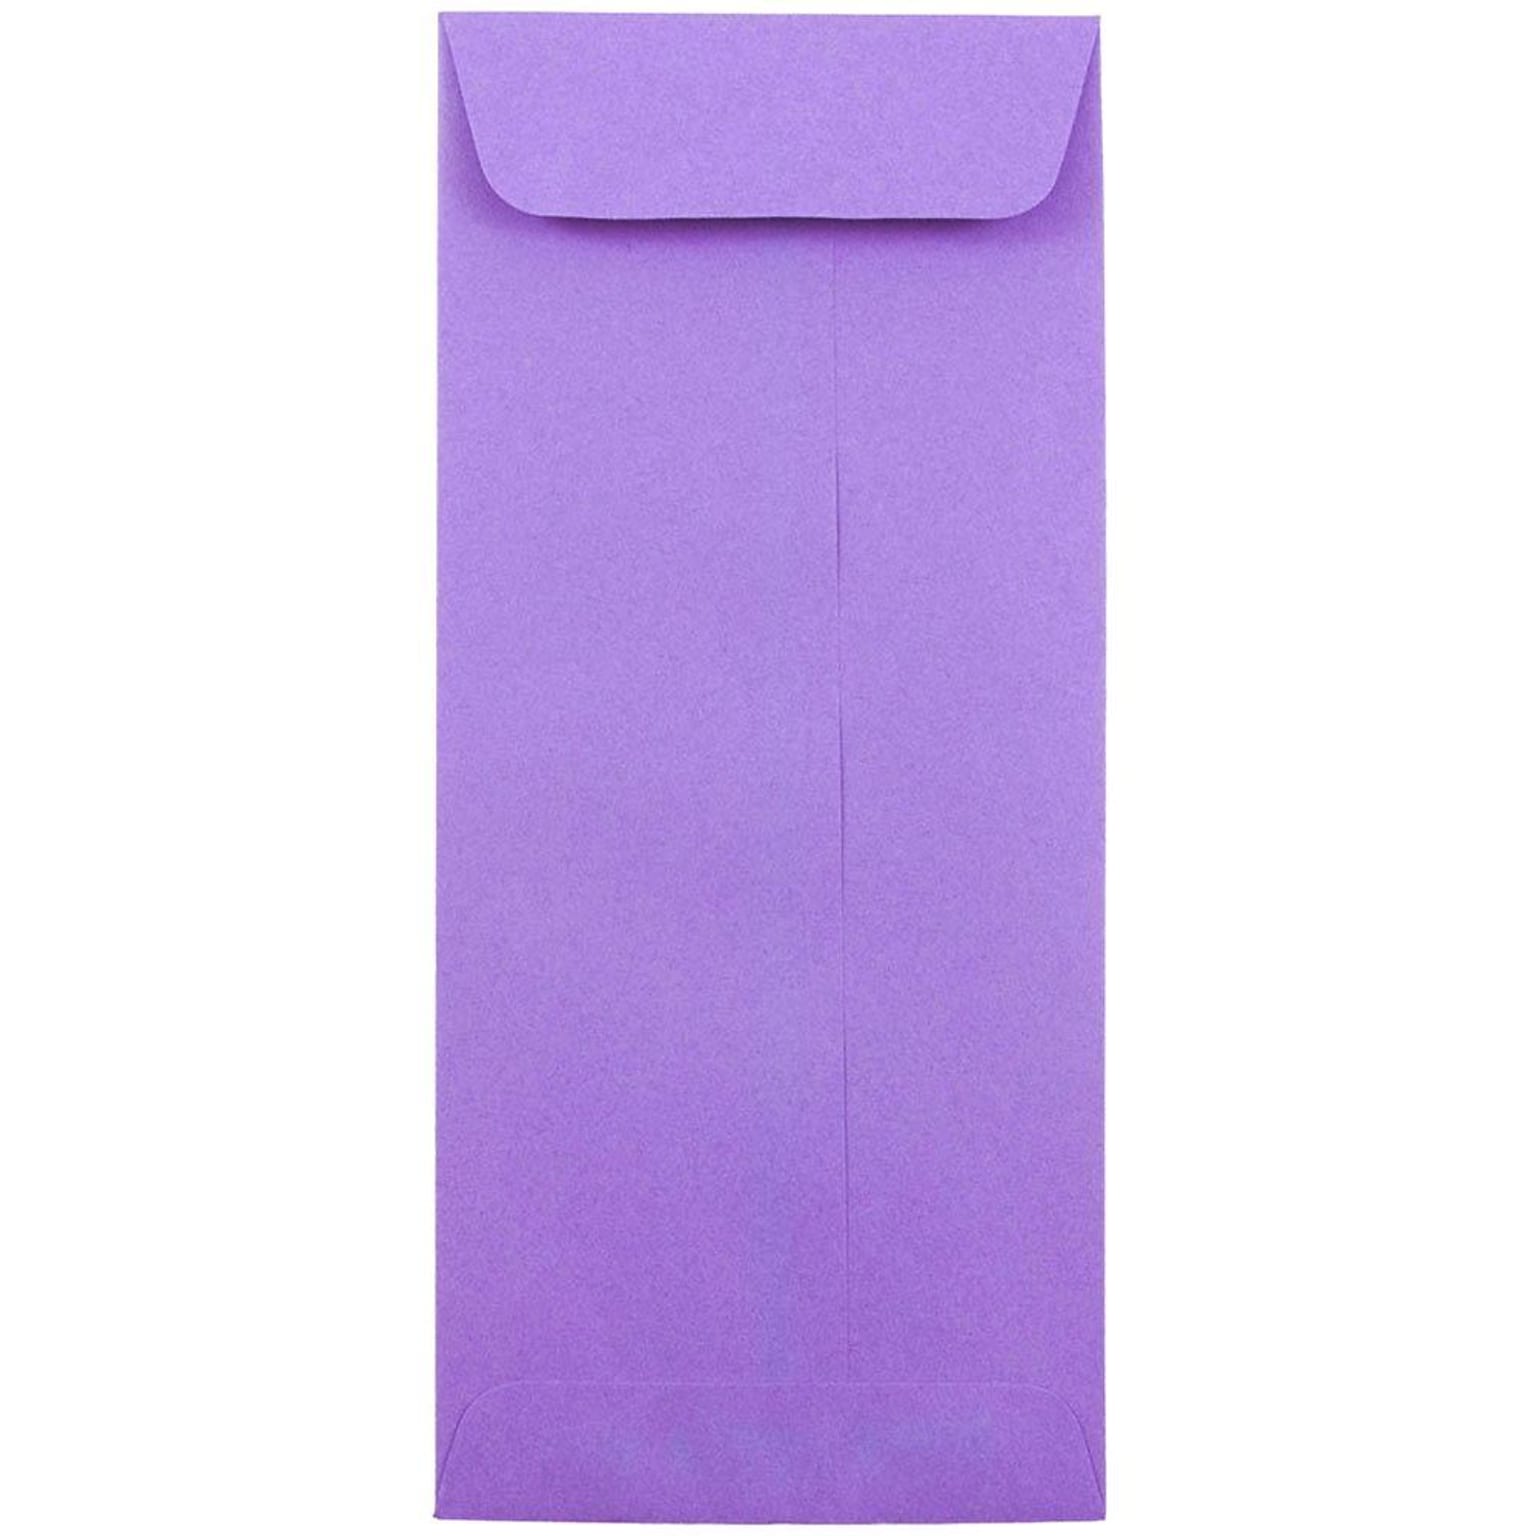 JAM Paper #10 Policy Business Colored Envelopes, 4 1/8 x 9 1/2, Violet Purple Recycled, 25/Pack (15886)